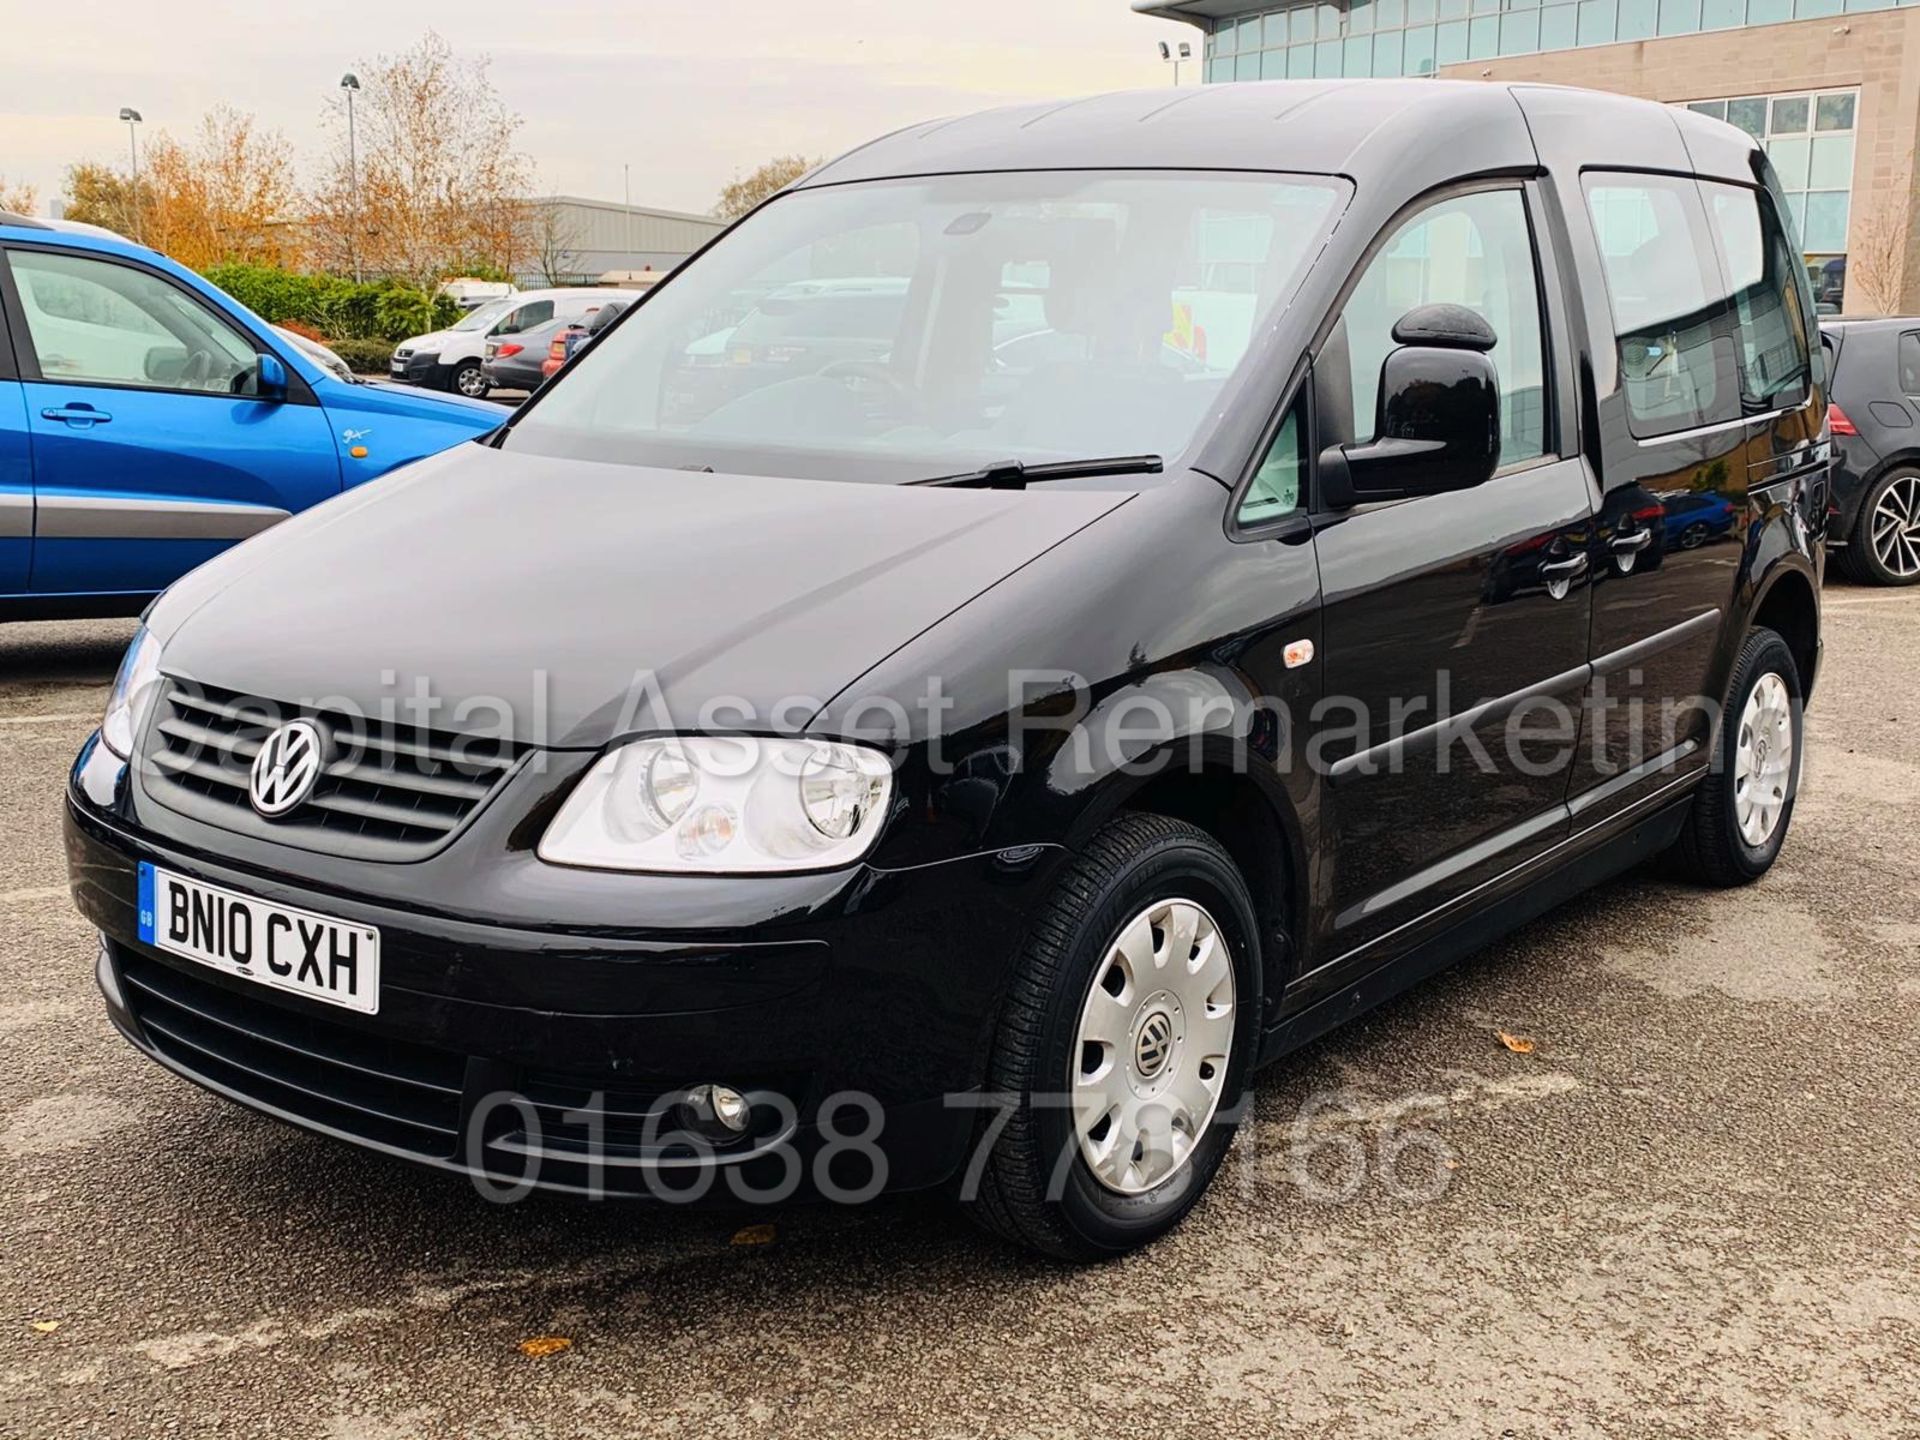 VOLKSWAGEN CADDY C20 *LIFE EDITION* DISABILITY ACCESS / WAV (2010) '1.9 TDI -AUTO' *A/C* (LOW MILES) - Image 4 of 32